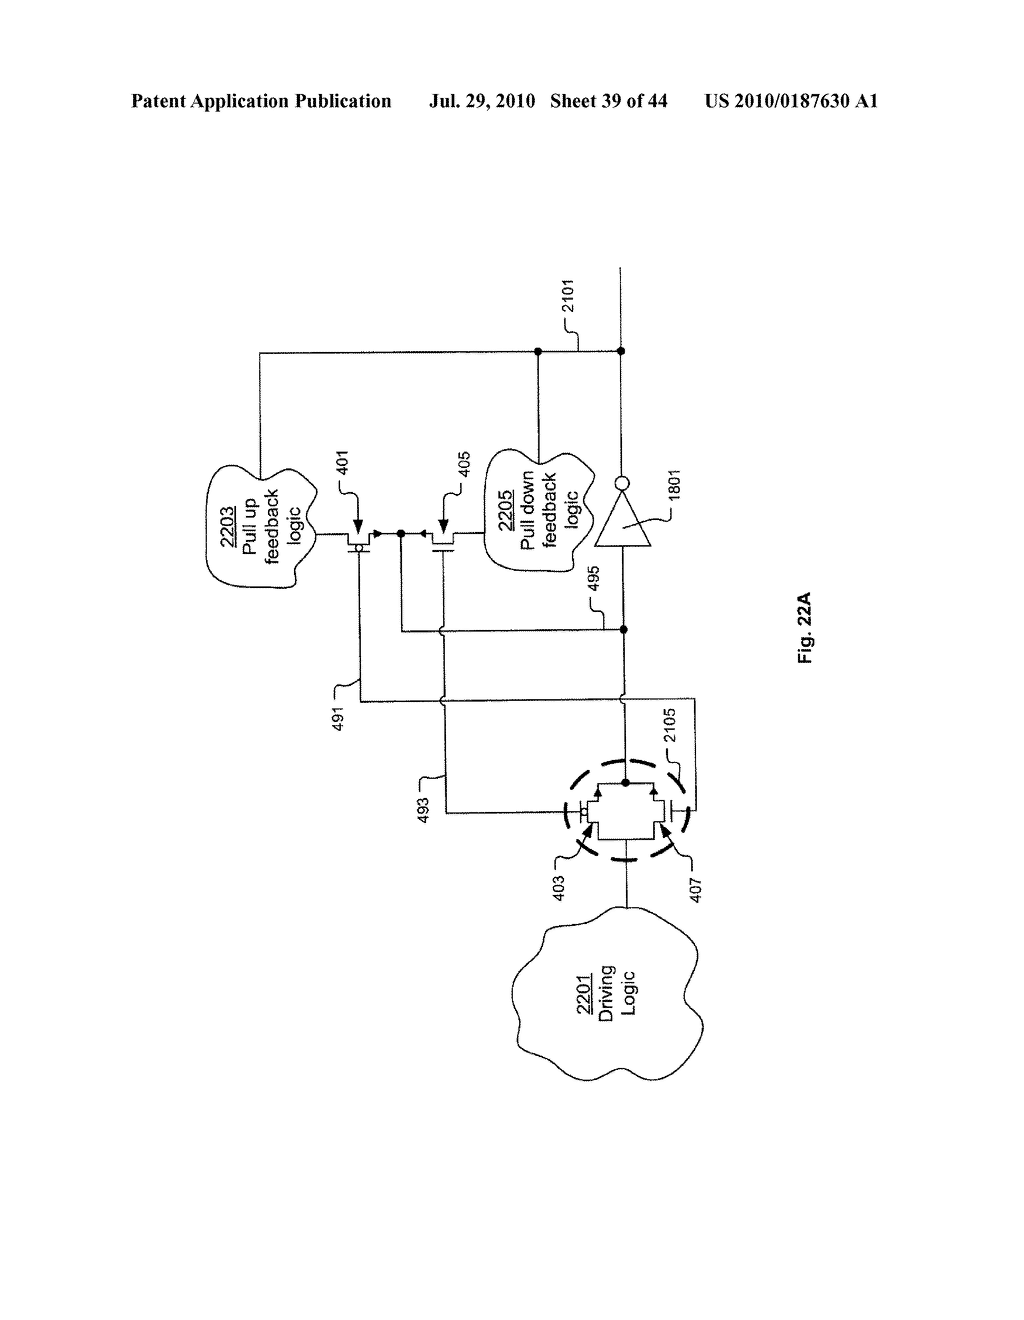 Channelized Gate Level Cross-Coupled Transistor Device with Connection Between Cross-Coupled Transistor Gate Electrodes Made Utilizing Interconnect Level Other than Gate Electrode Level - diagram, schematic, and image 40